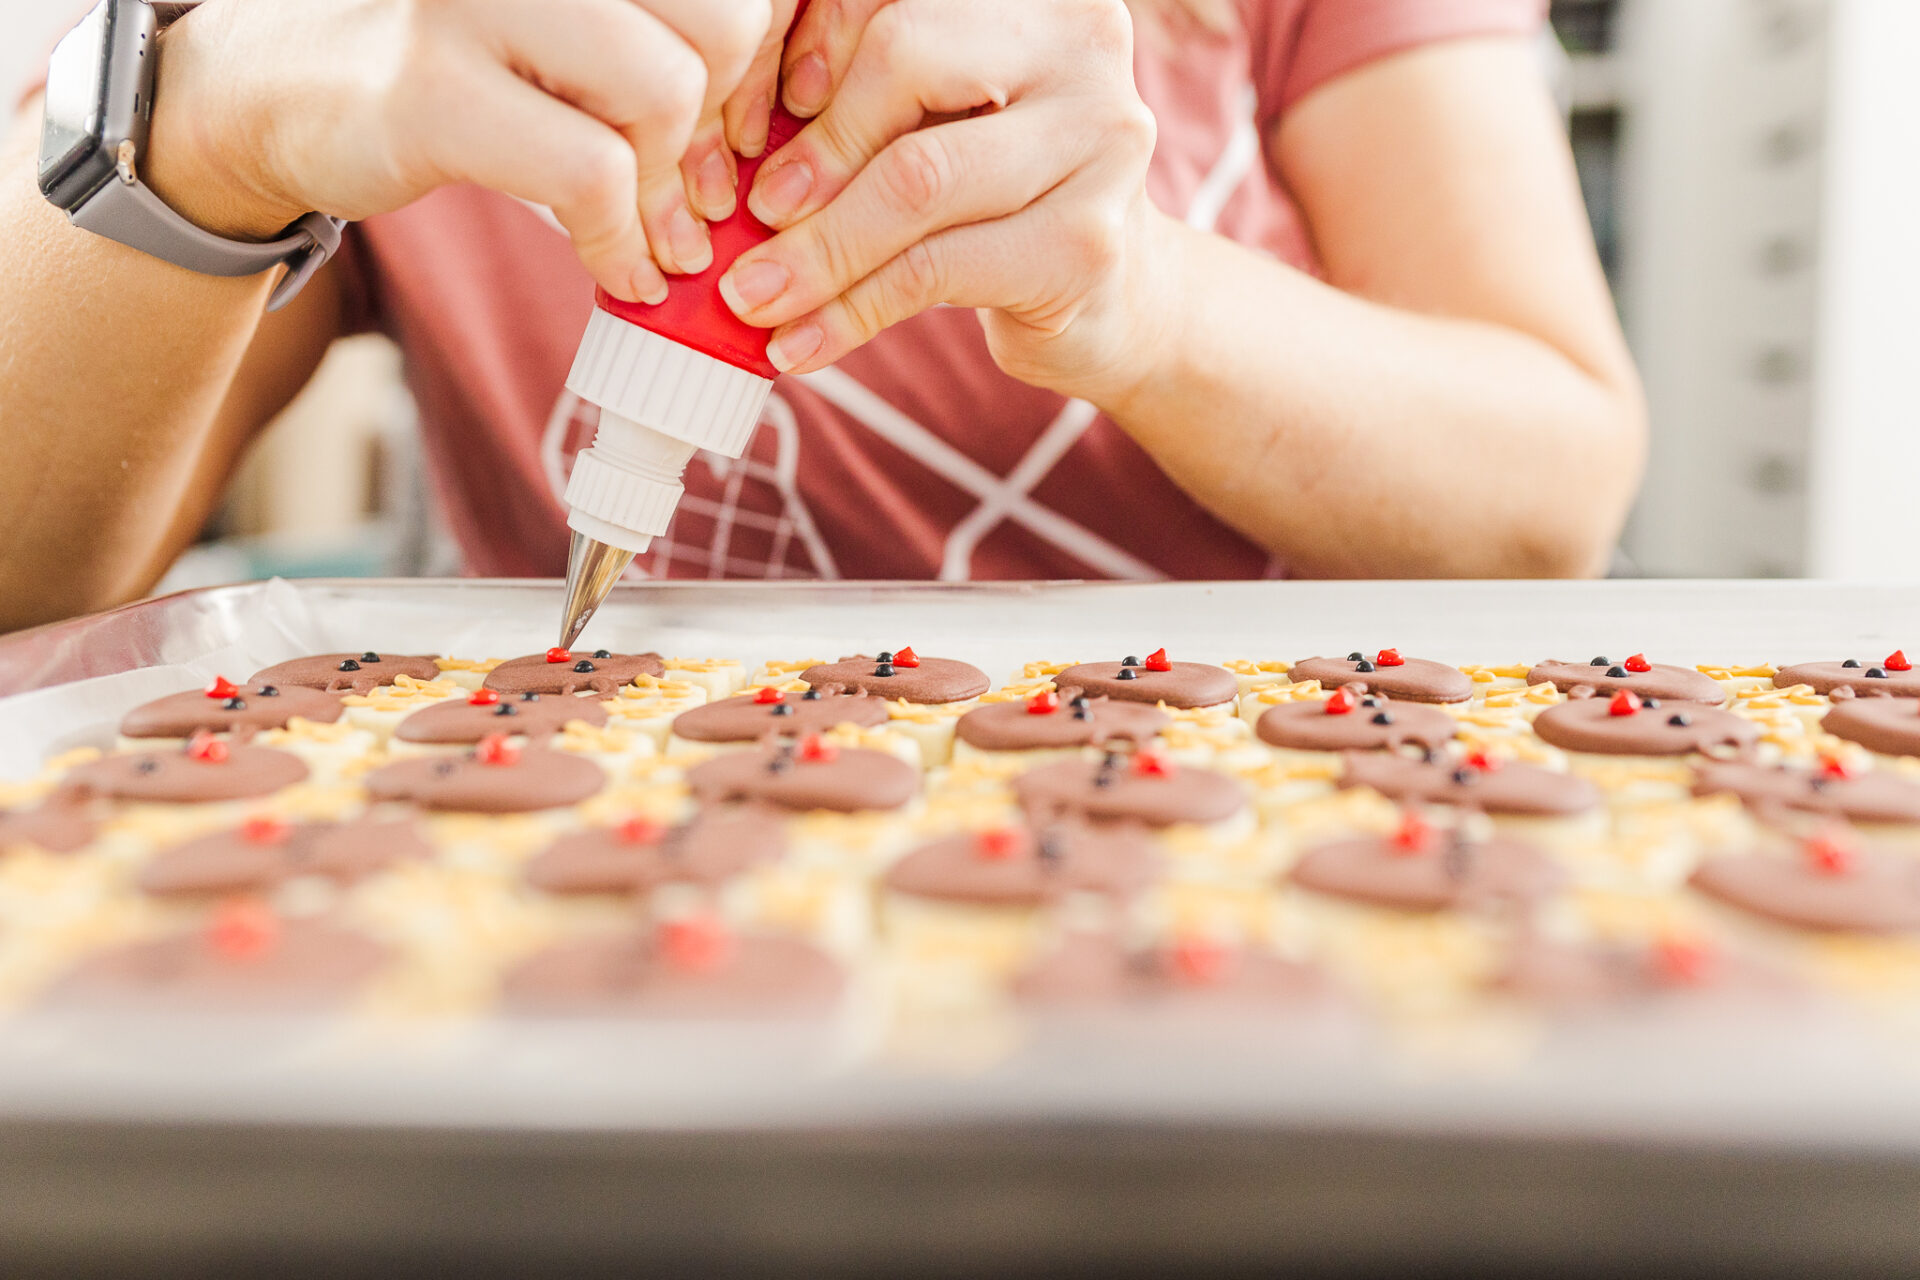 Beth from Bardellini's Creative Confections decorates cookies in Natick Massachusetts